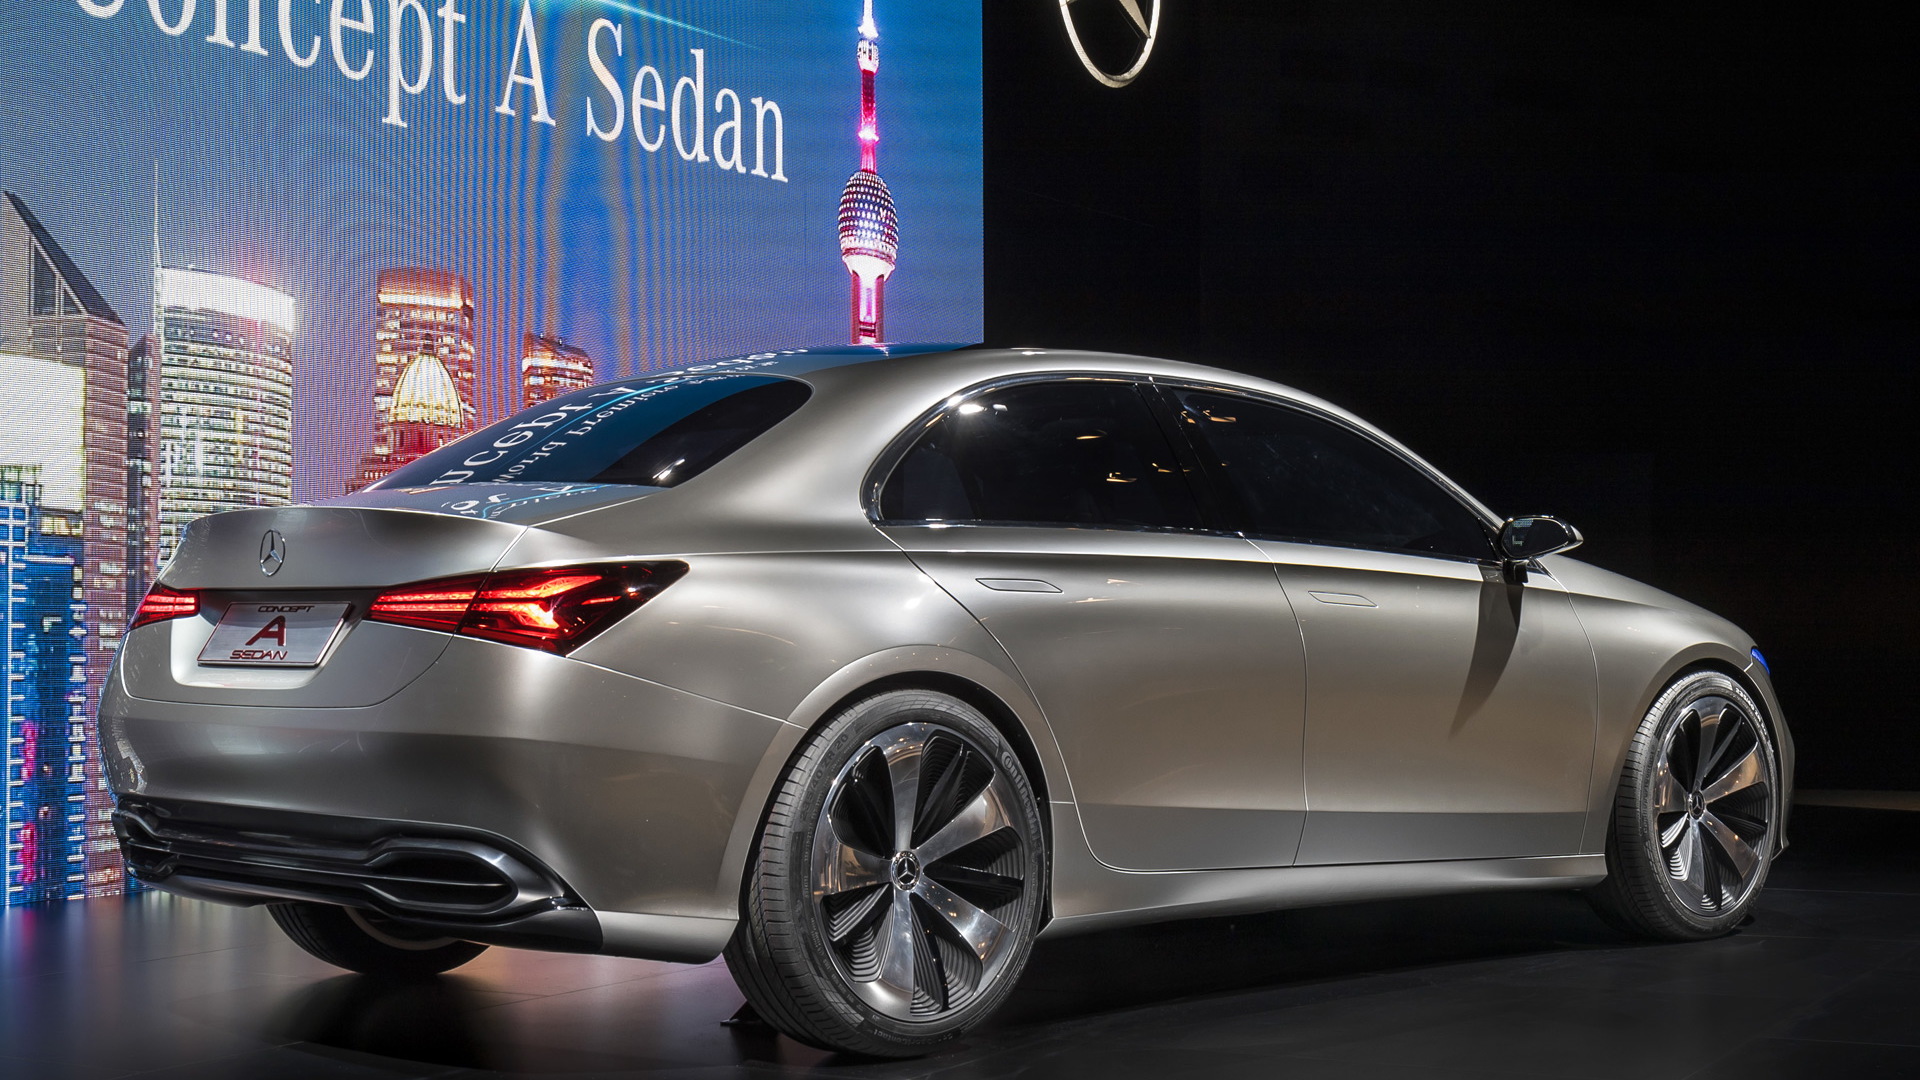 Mercedes-Benz A-Class sedan previewed by concept in Shanghai